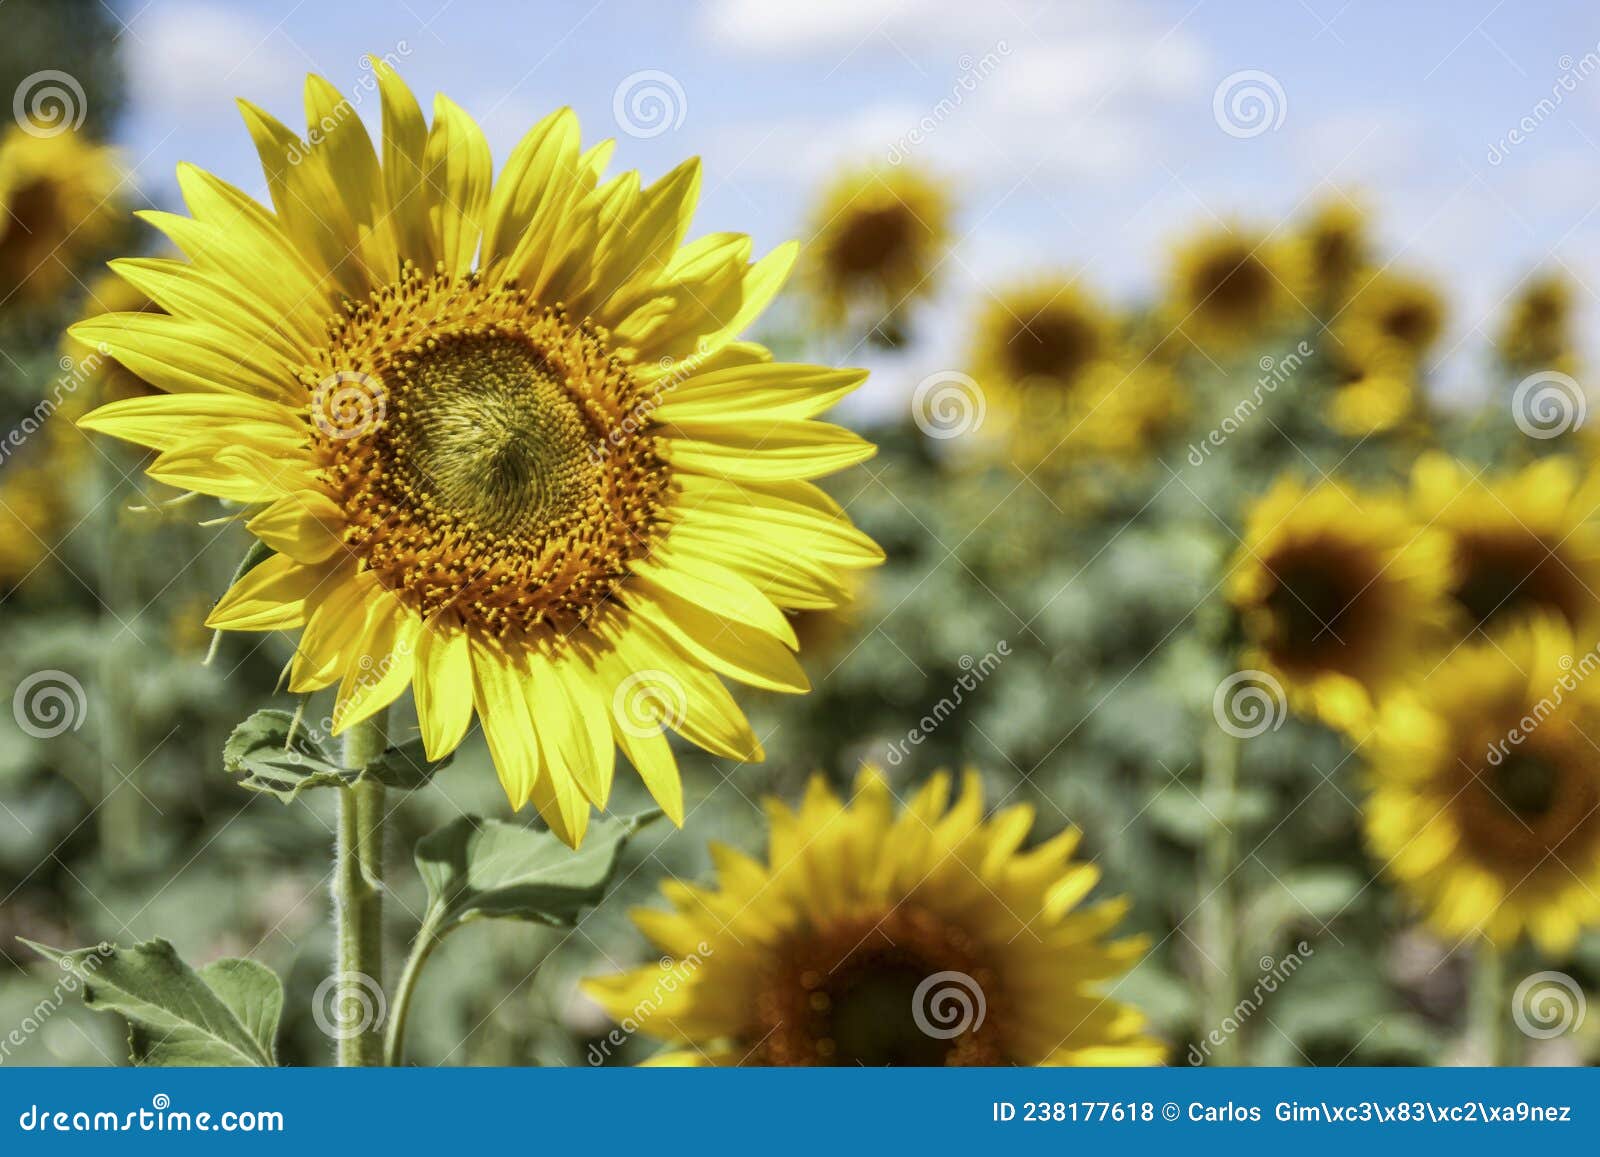 sunflowers in a field near the city of cuenca